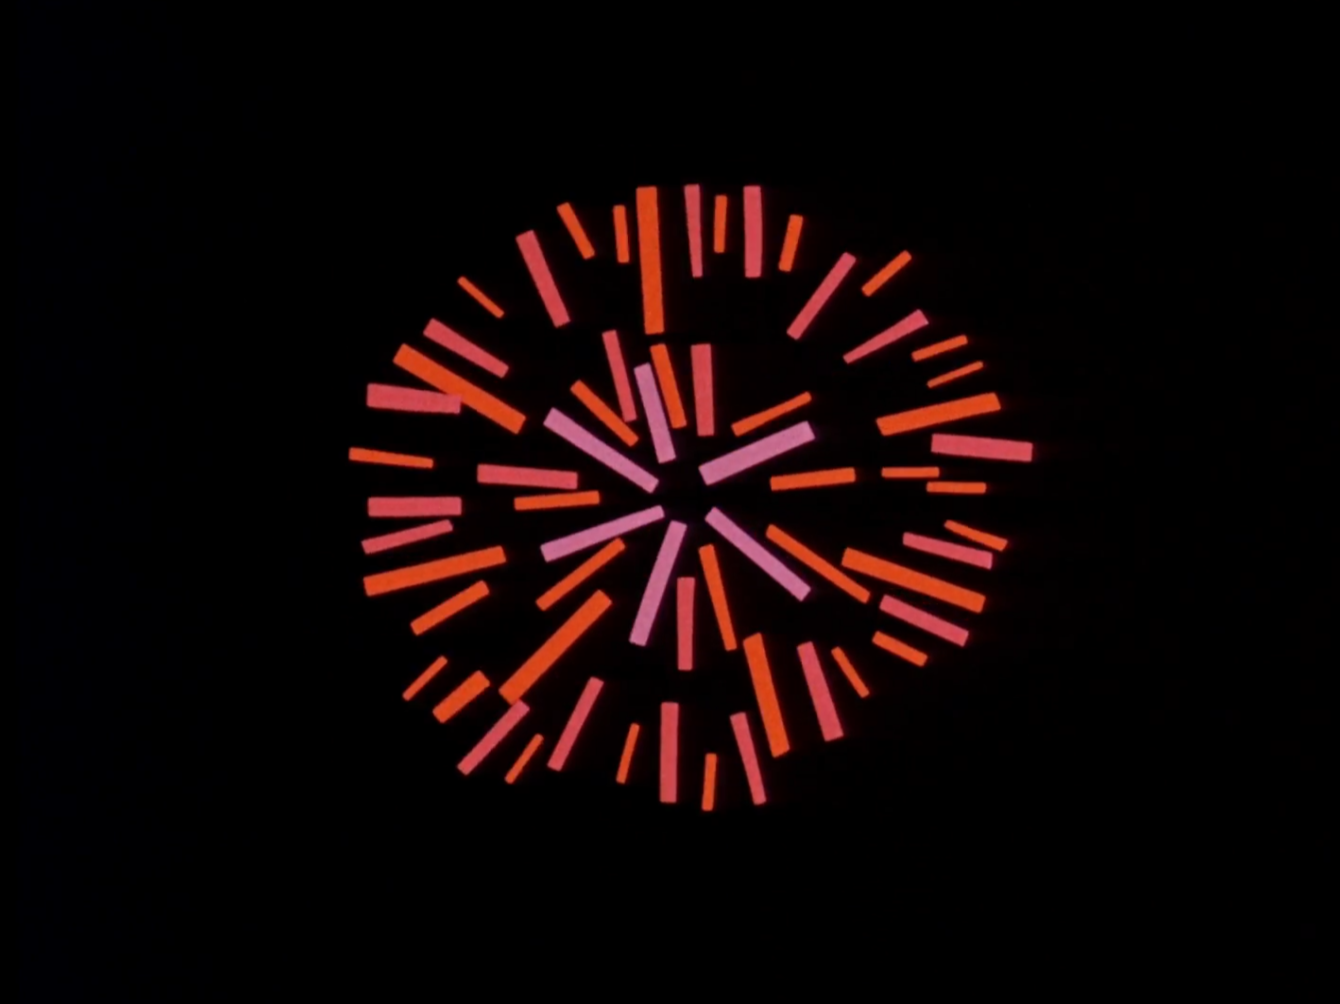 still from paper cut animation depicting red and pink scraps of paper on a black background fanning out like a firework